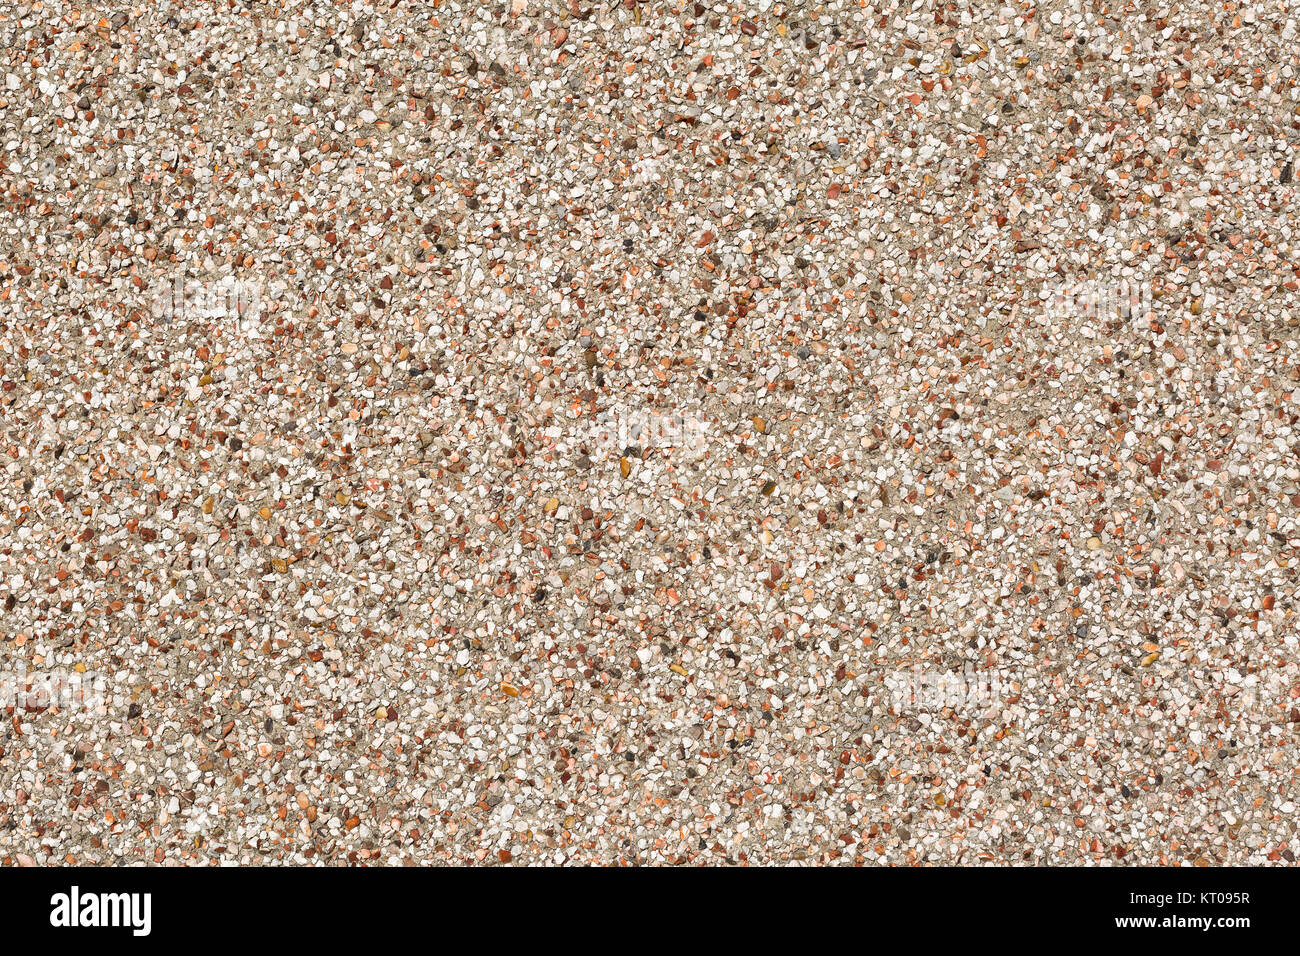 Close up image of a pebble-dashed wall Stock Photo